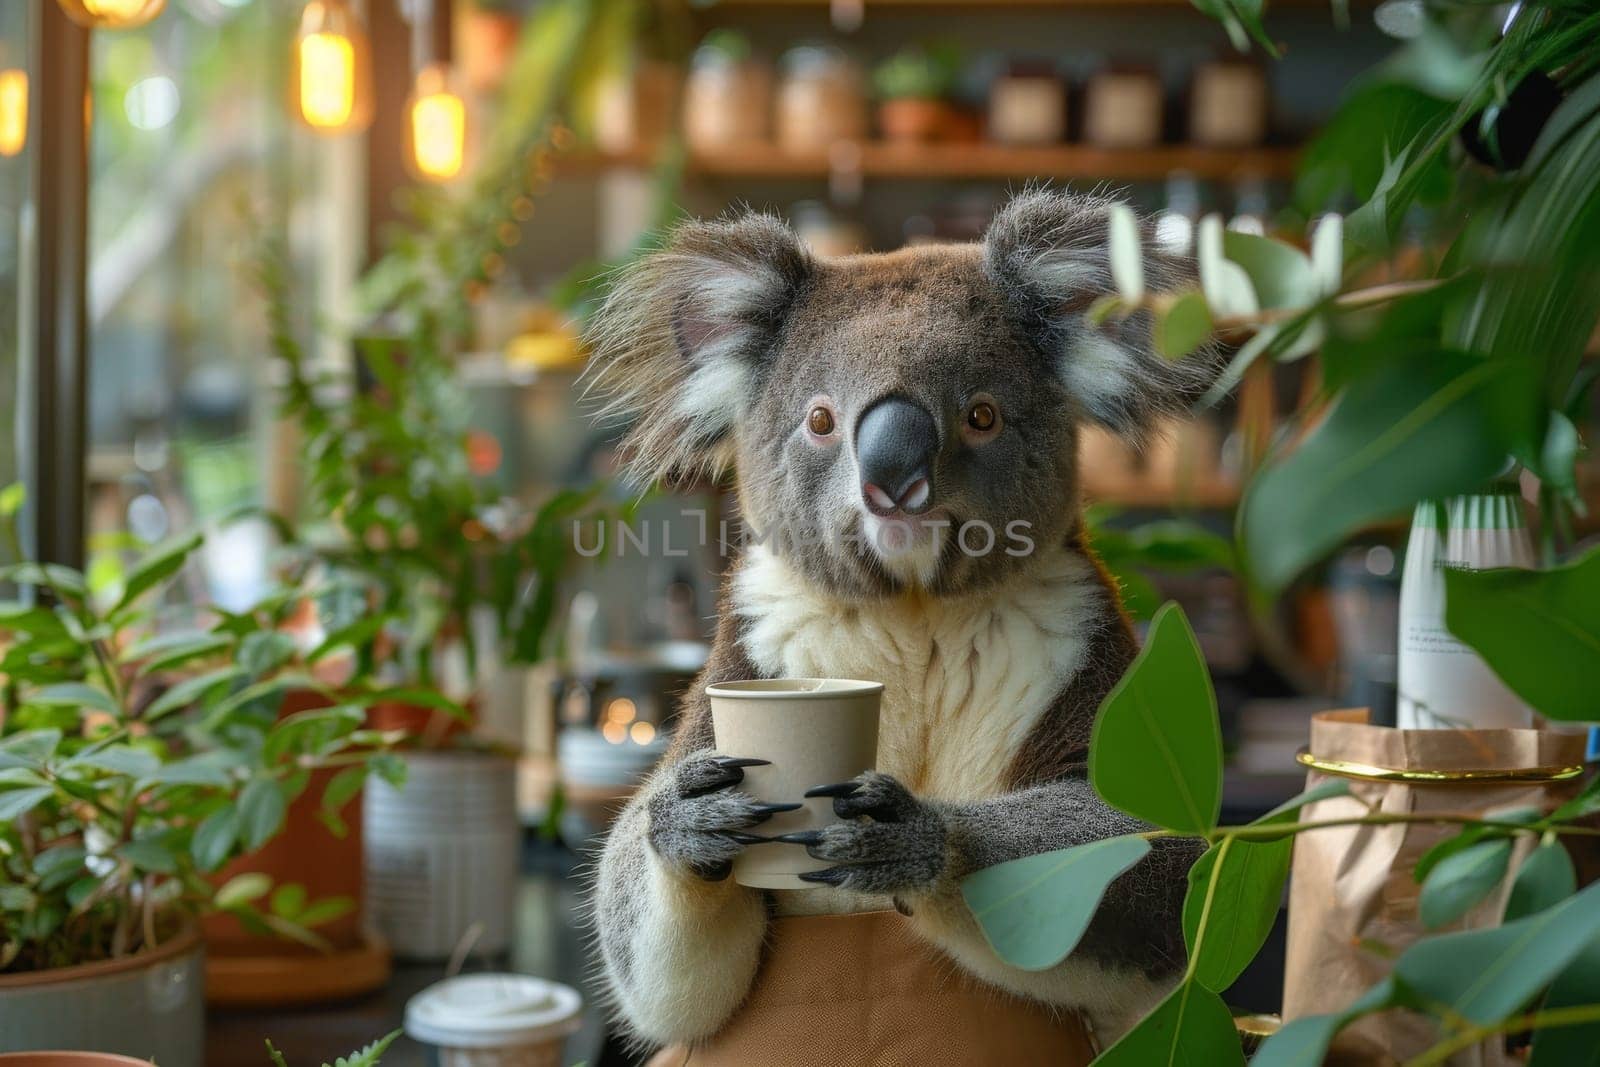 A koala is holding a cup of coffee in a cafe. The scene is lively and playful, with the koala being the main focus